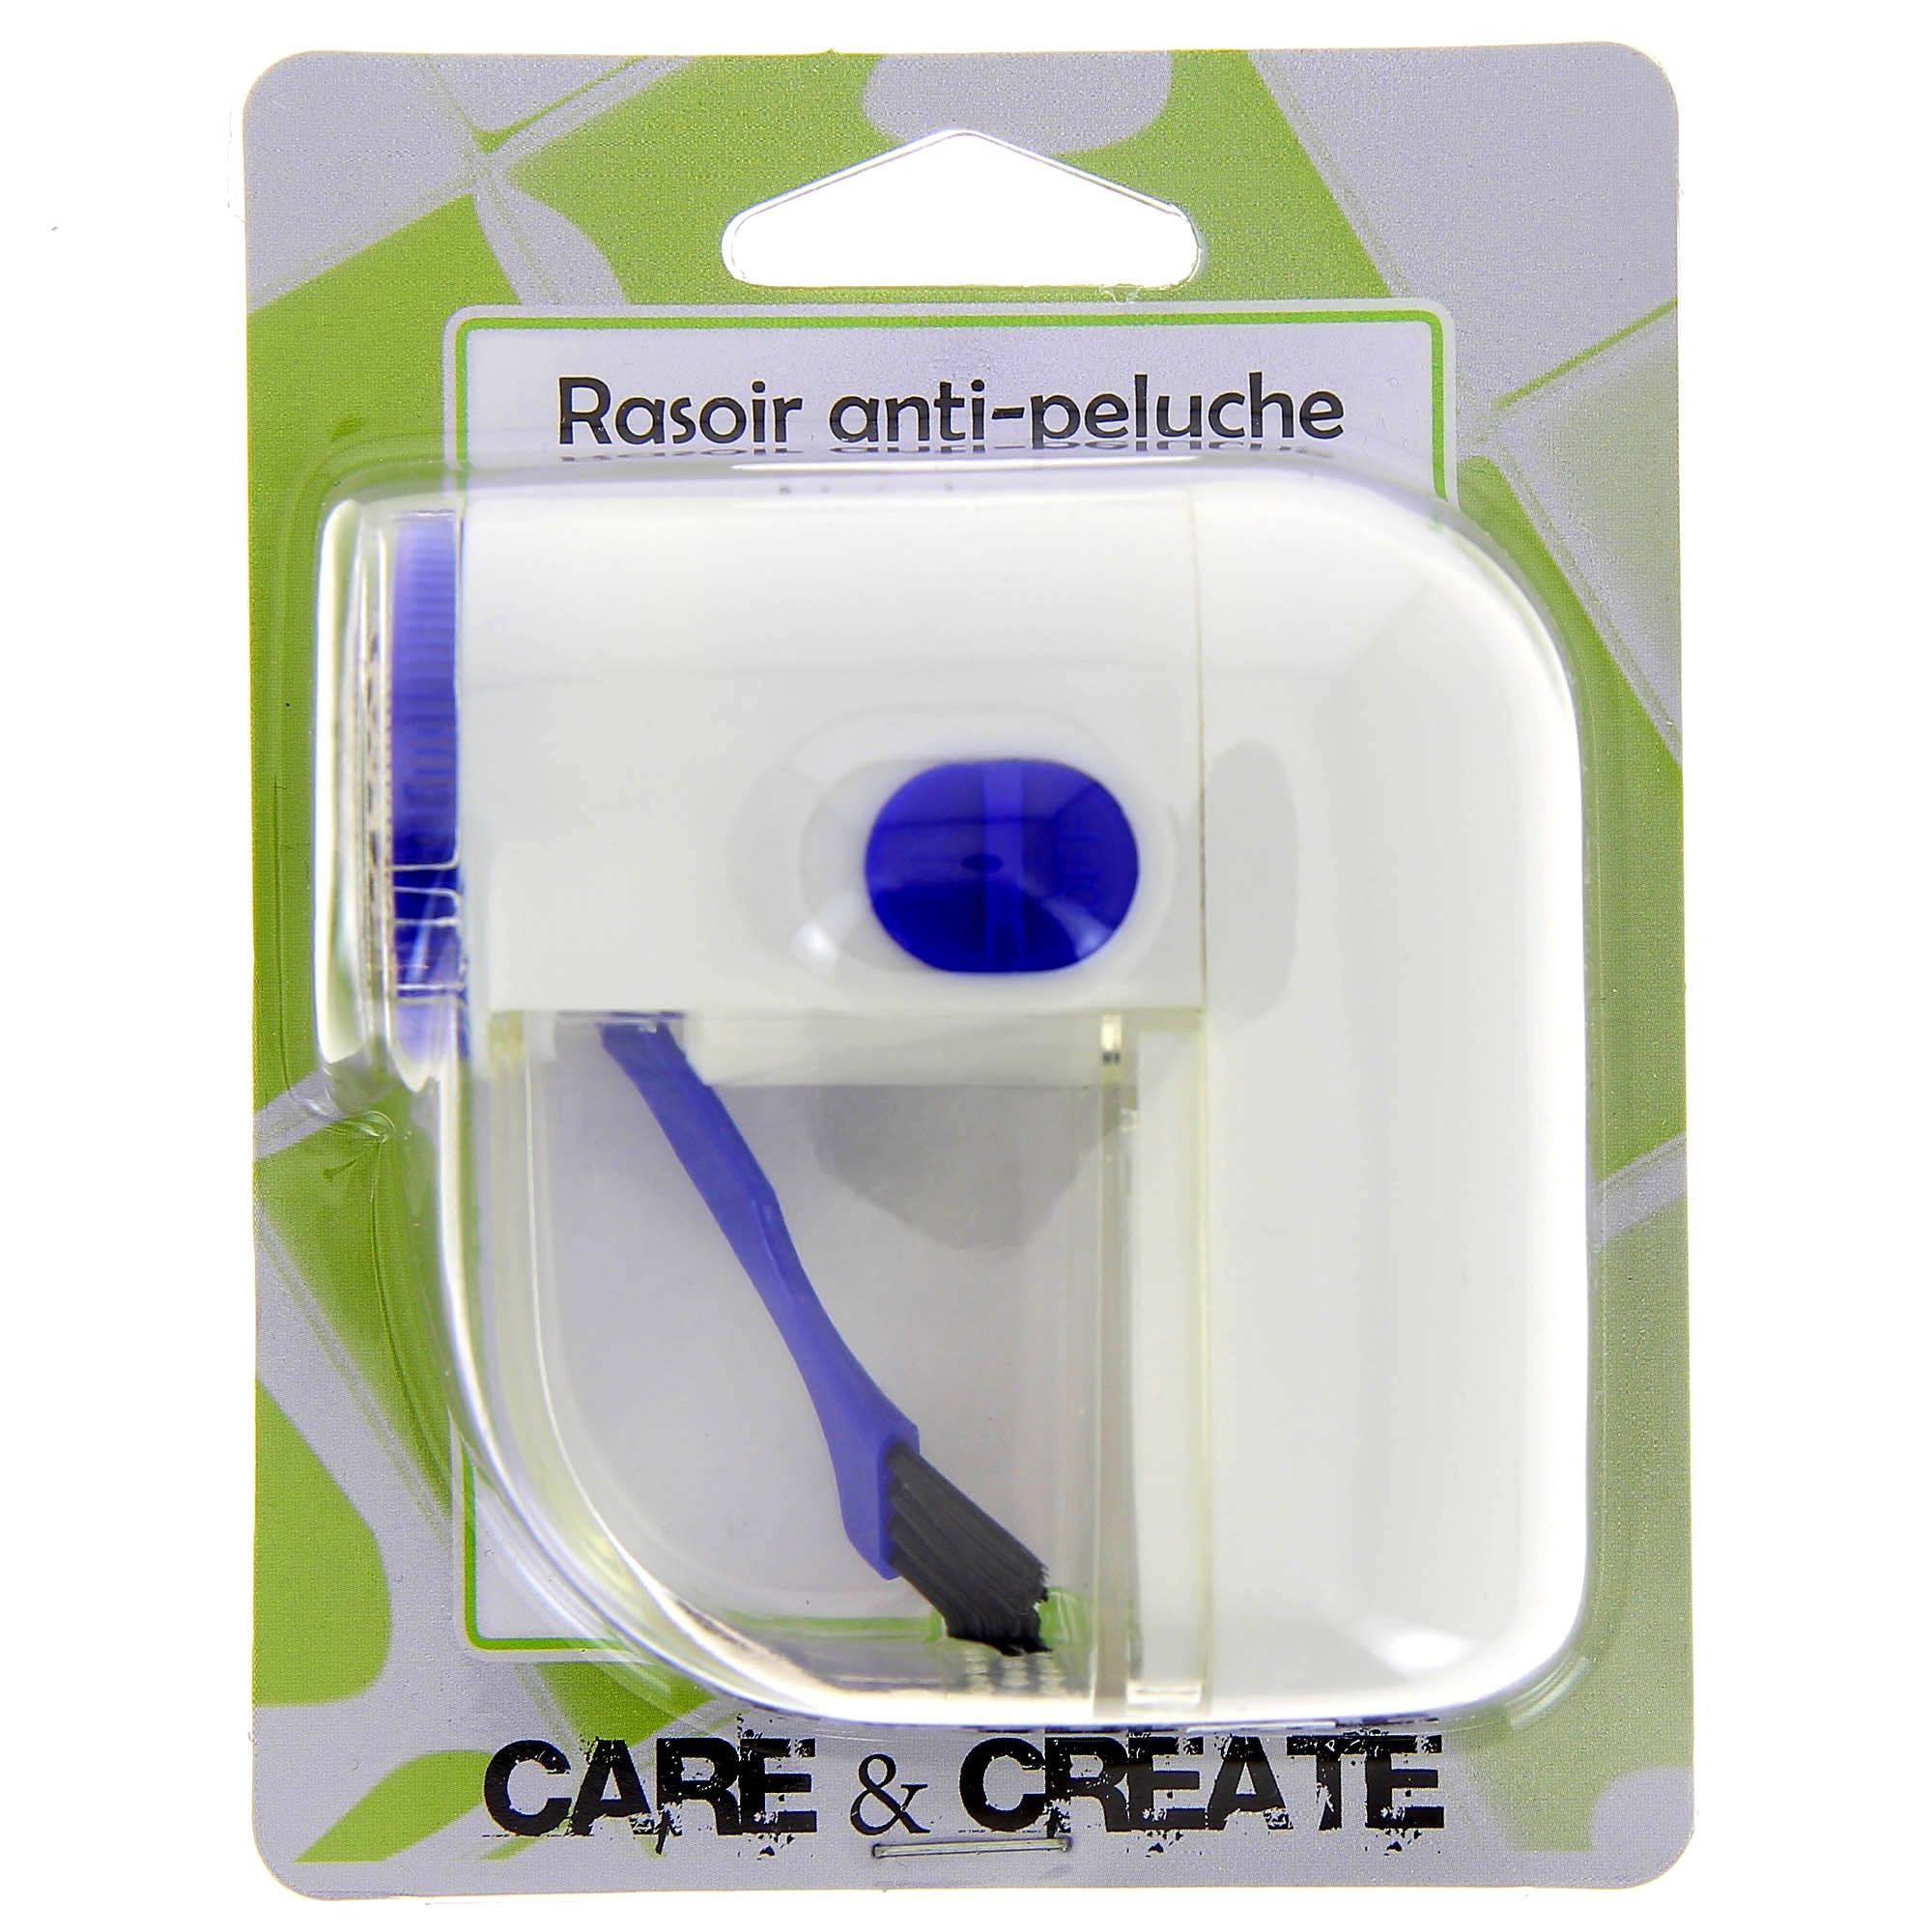 Rasoirs peluches - Brosses peluches pour pull - Craftine